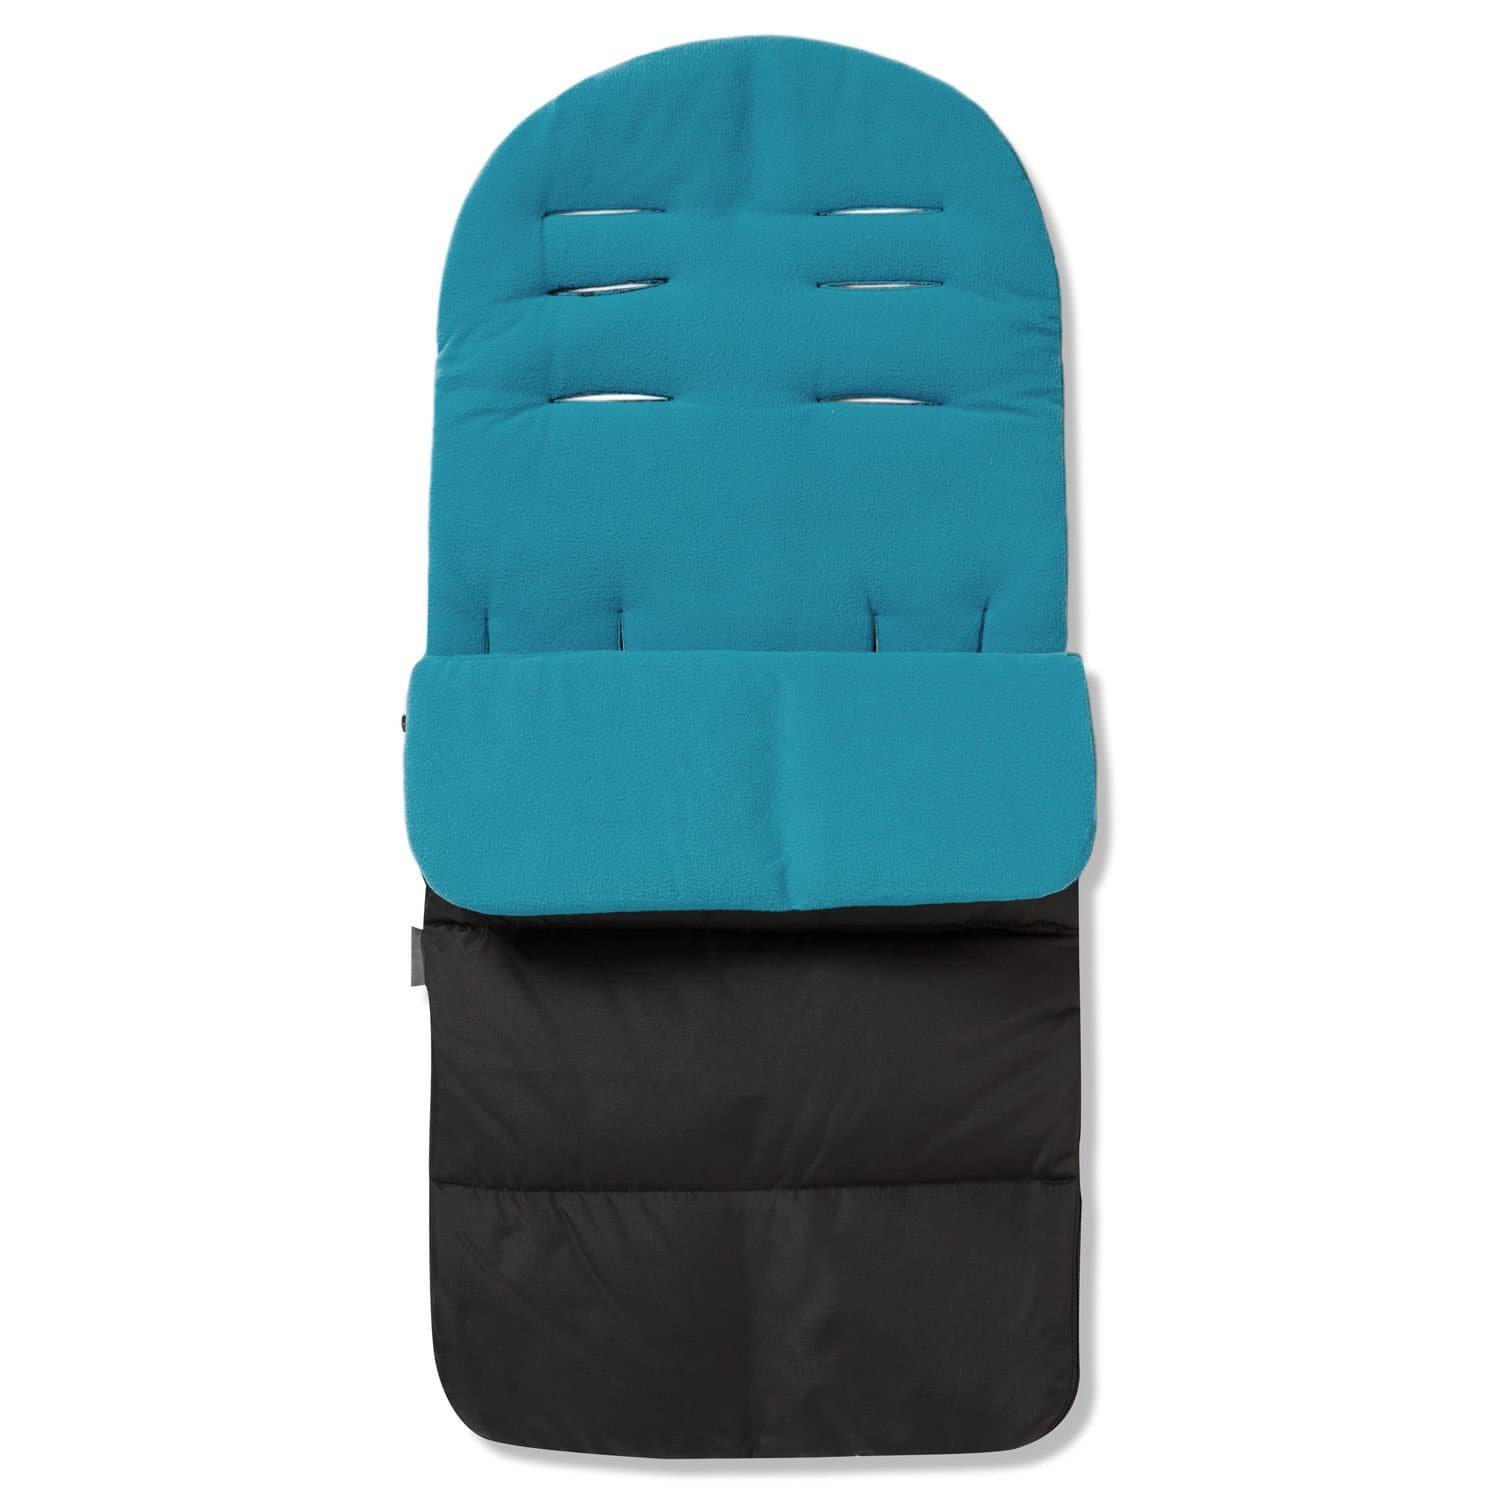 Premium Footmuff / Cosy Toes Compatible with NeoNato - Ocean Blue / Fits All Models | For Your Little One